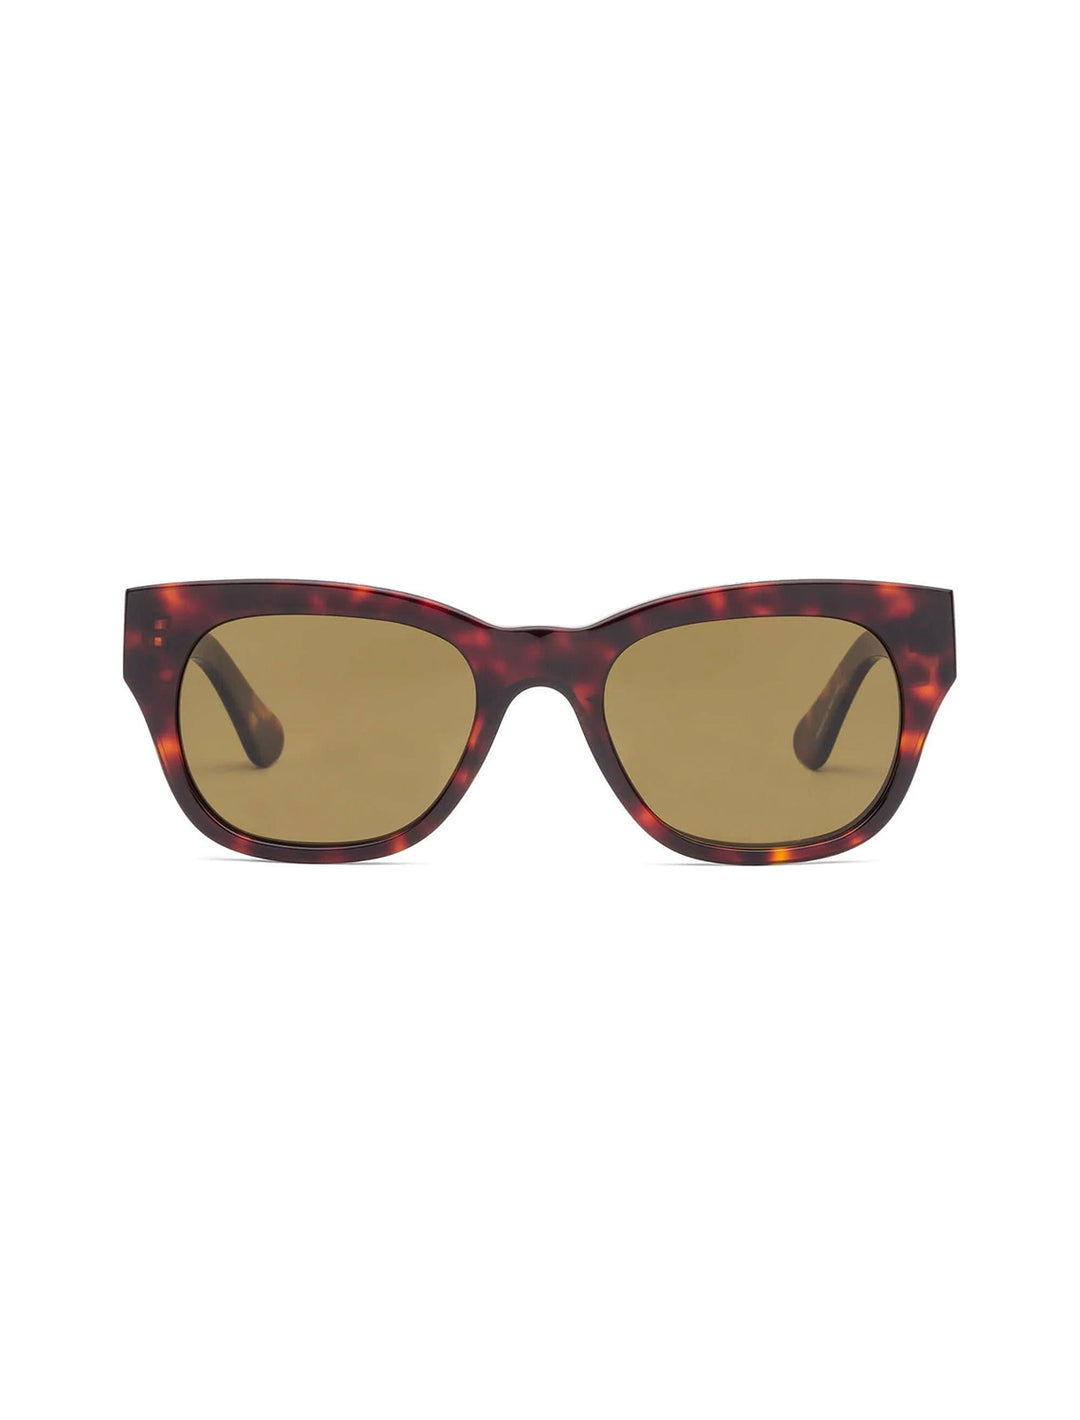 Front view of Caddis' miklos sunglass progressives in turtle and bronze.